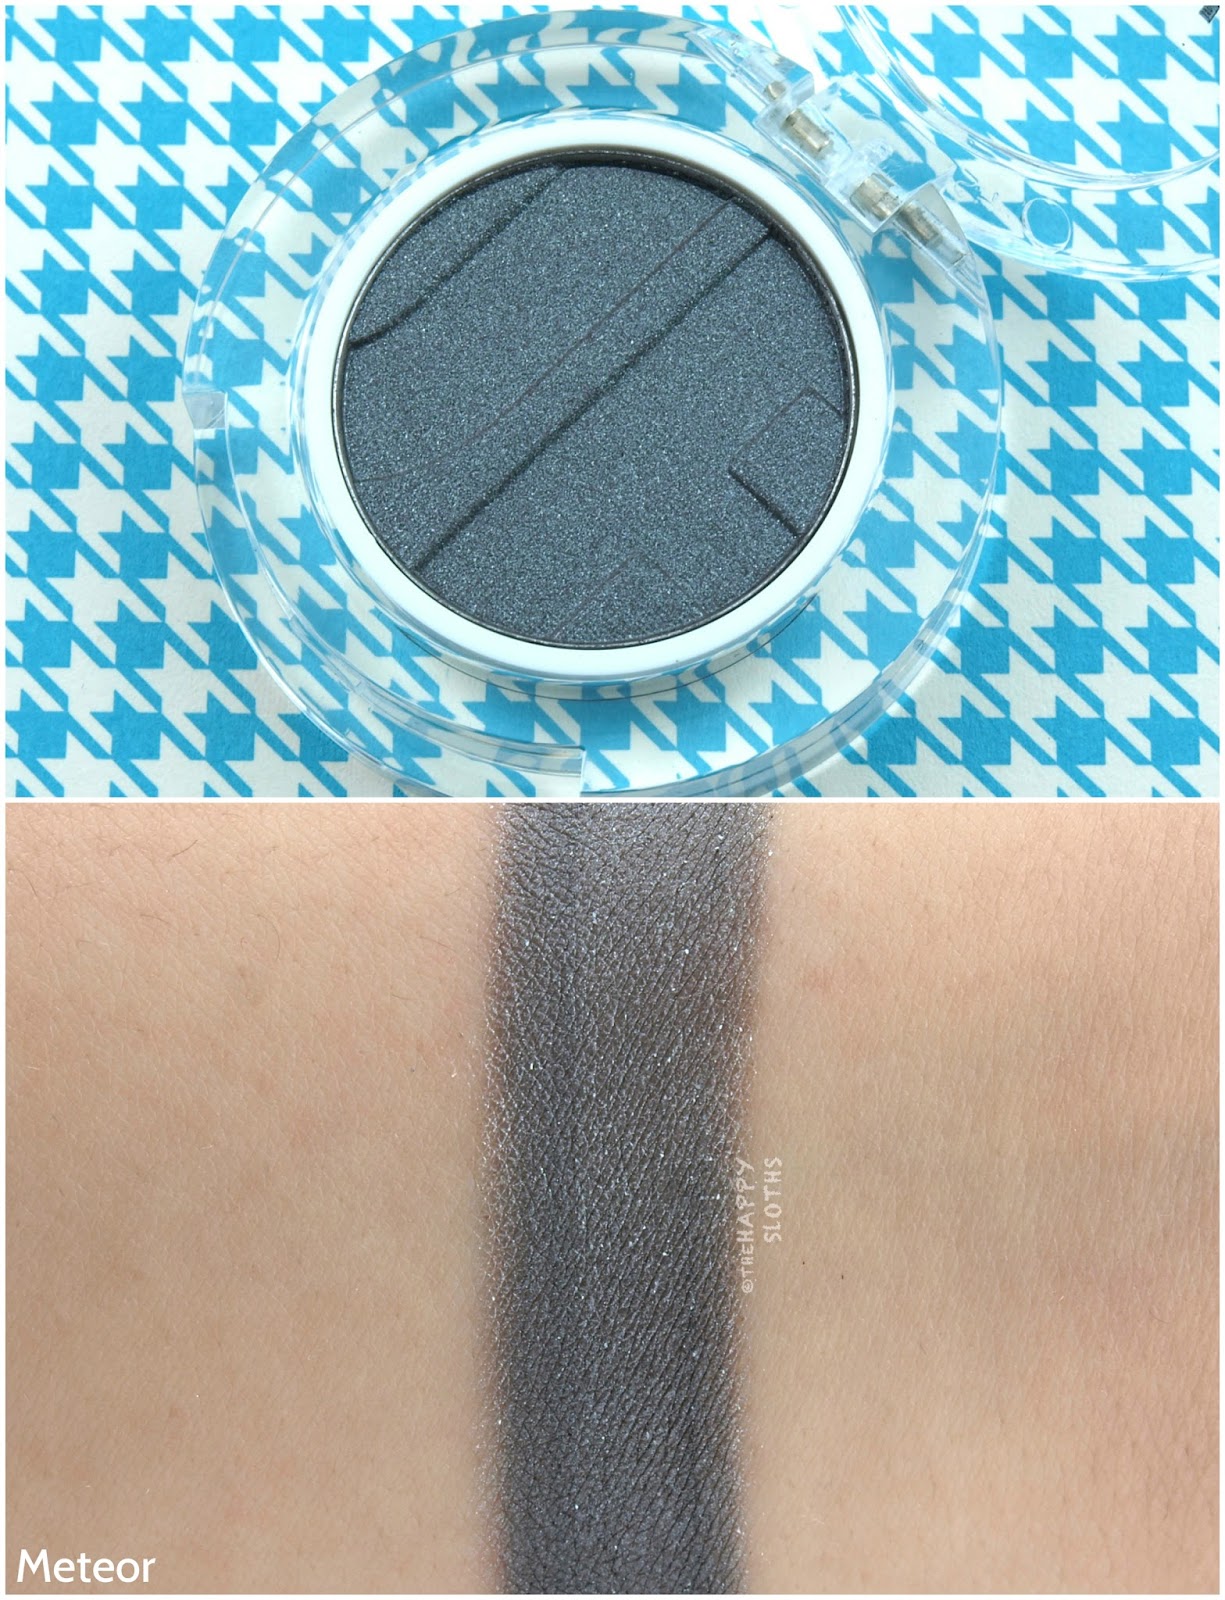 Joe Fresh Beauty Single Eyeshadow in Meteor: Review and Swatches